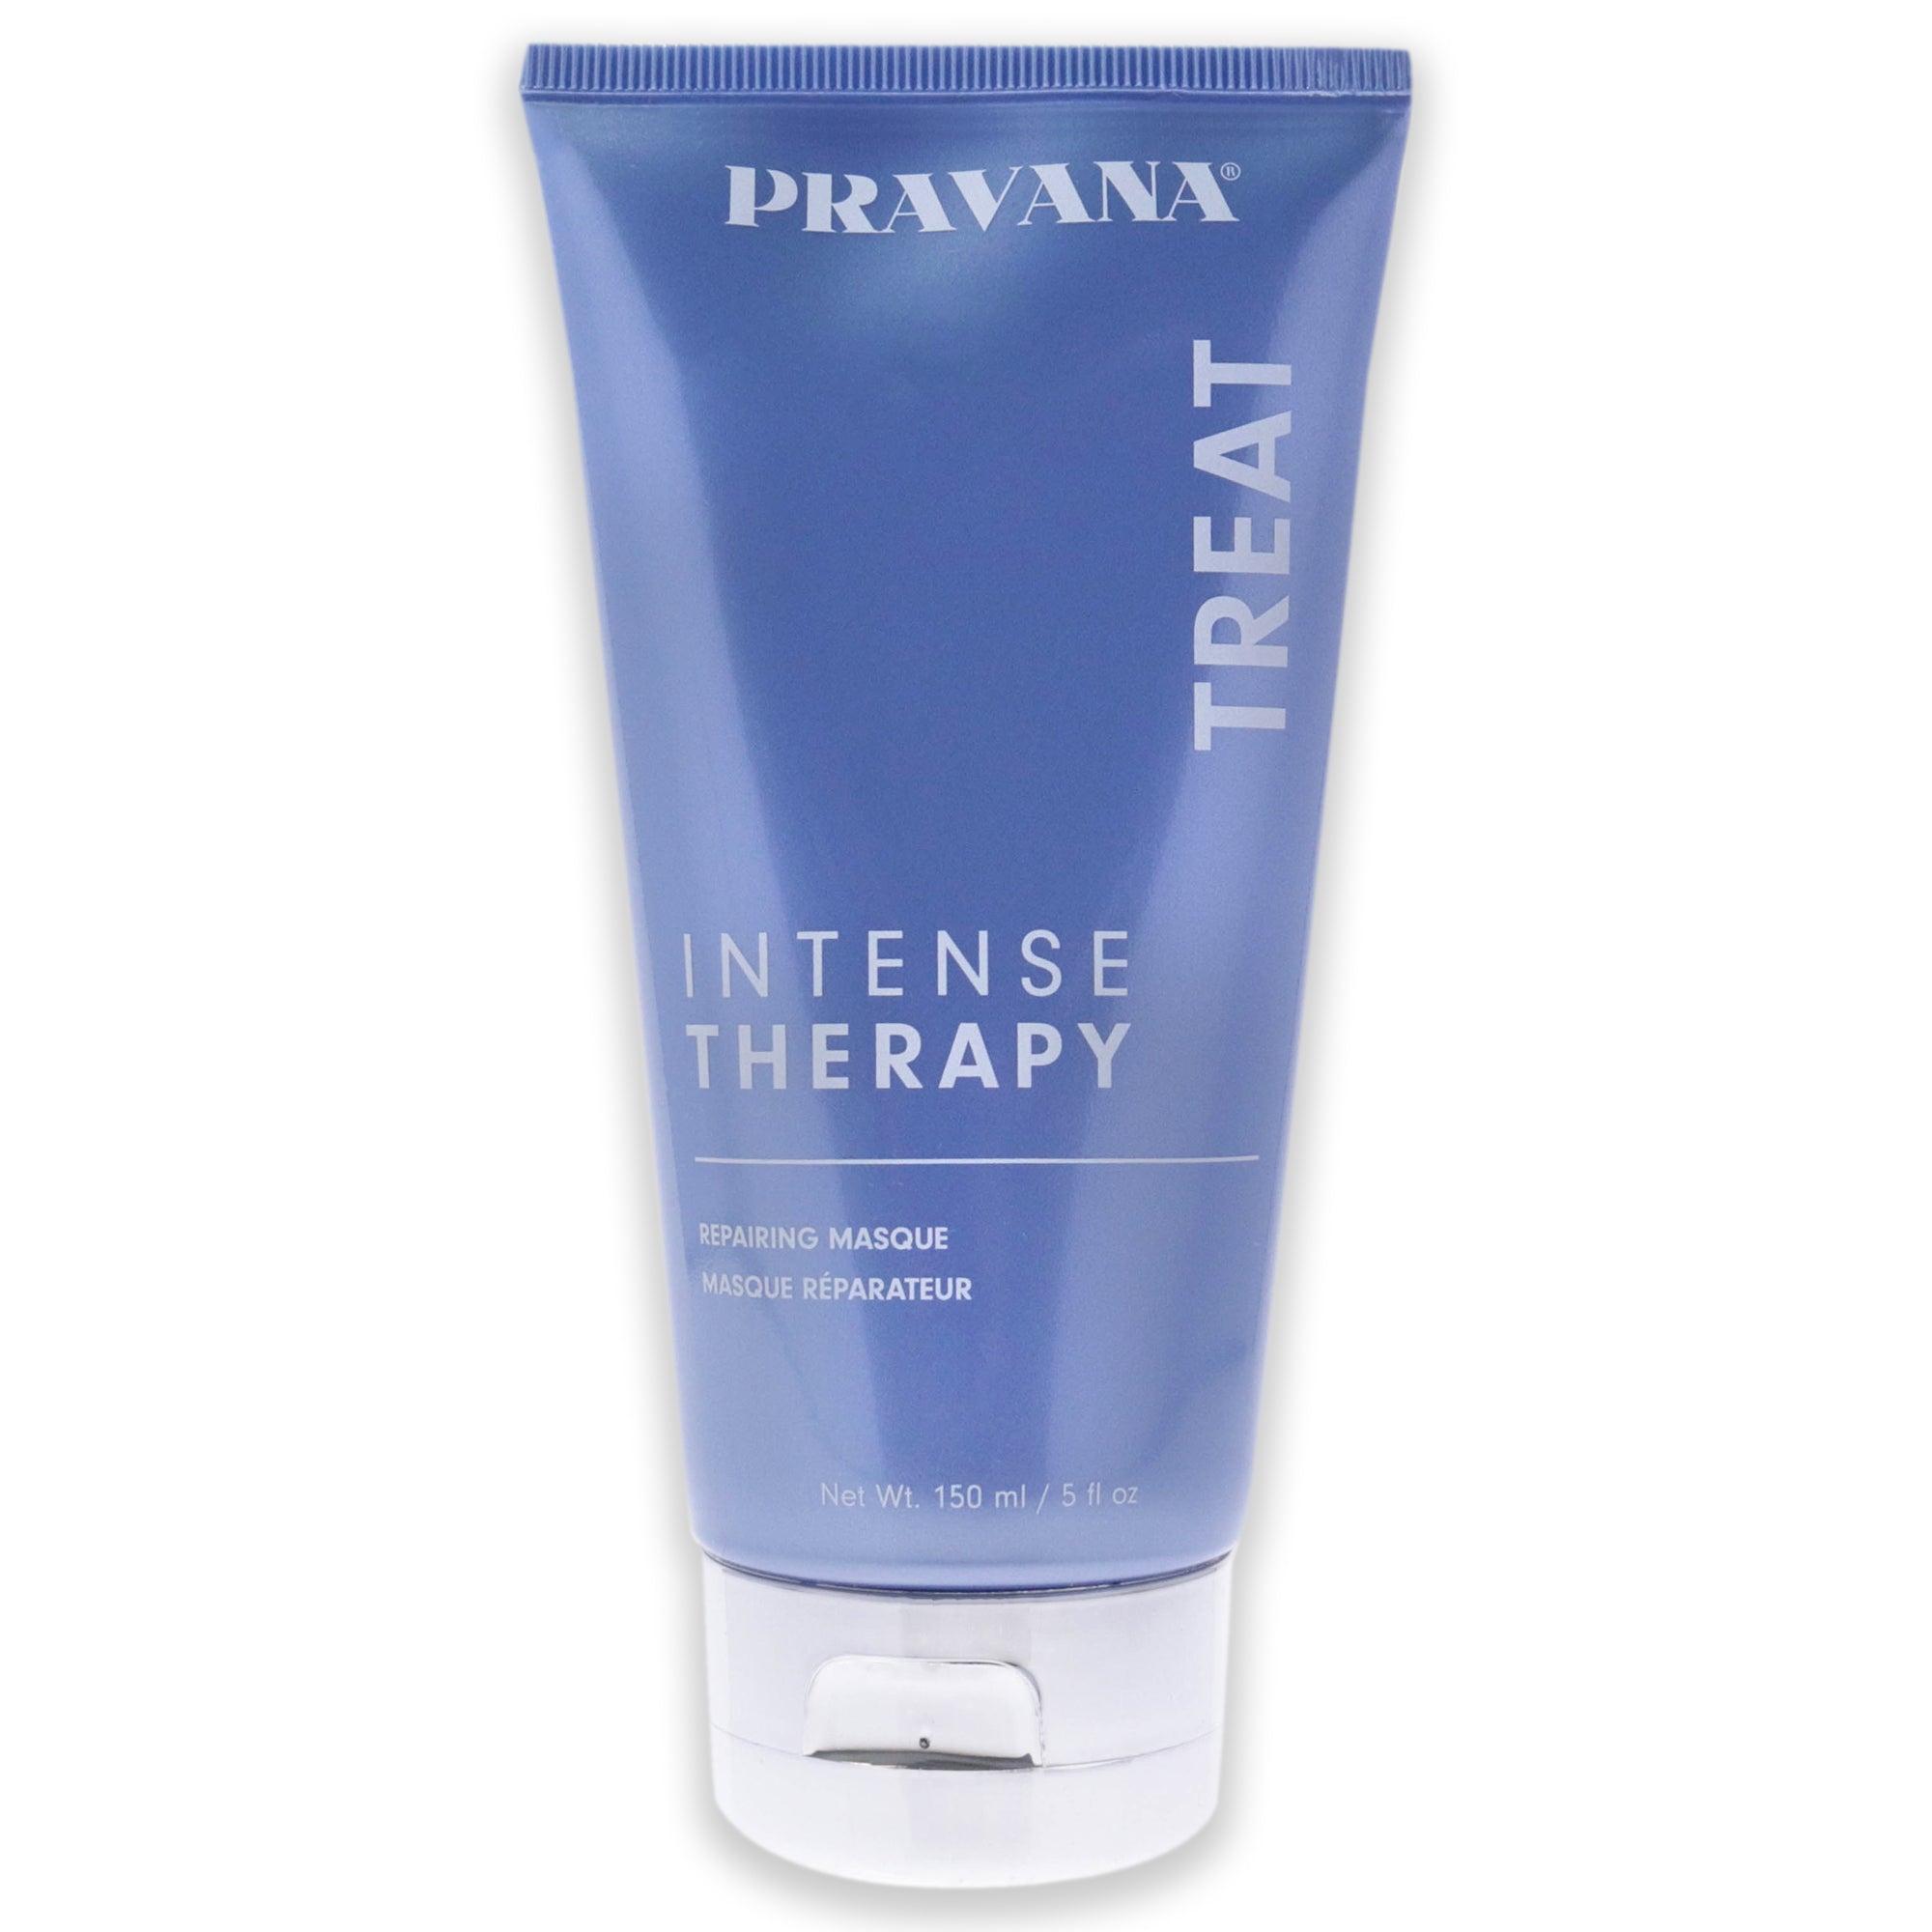 Intense Therapy Treat Masque by Pravana for Unisex - 5 oz Masque